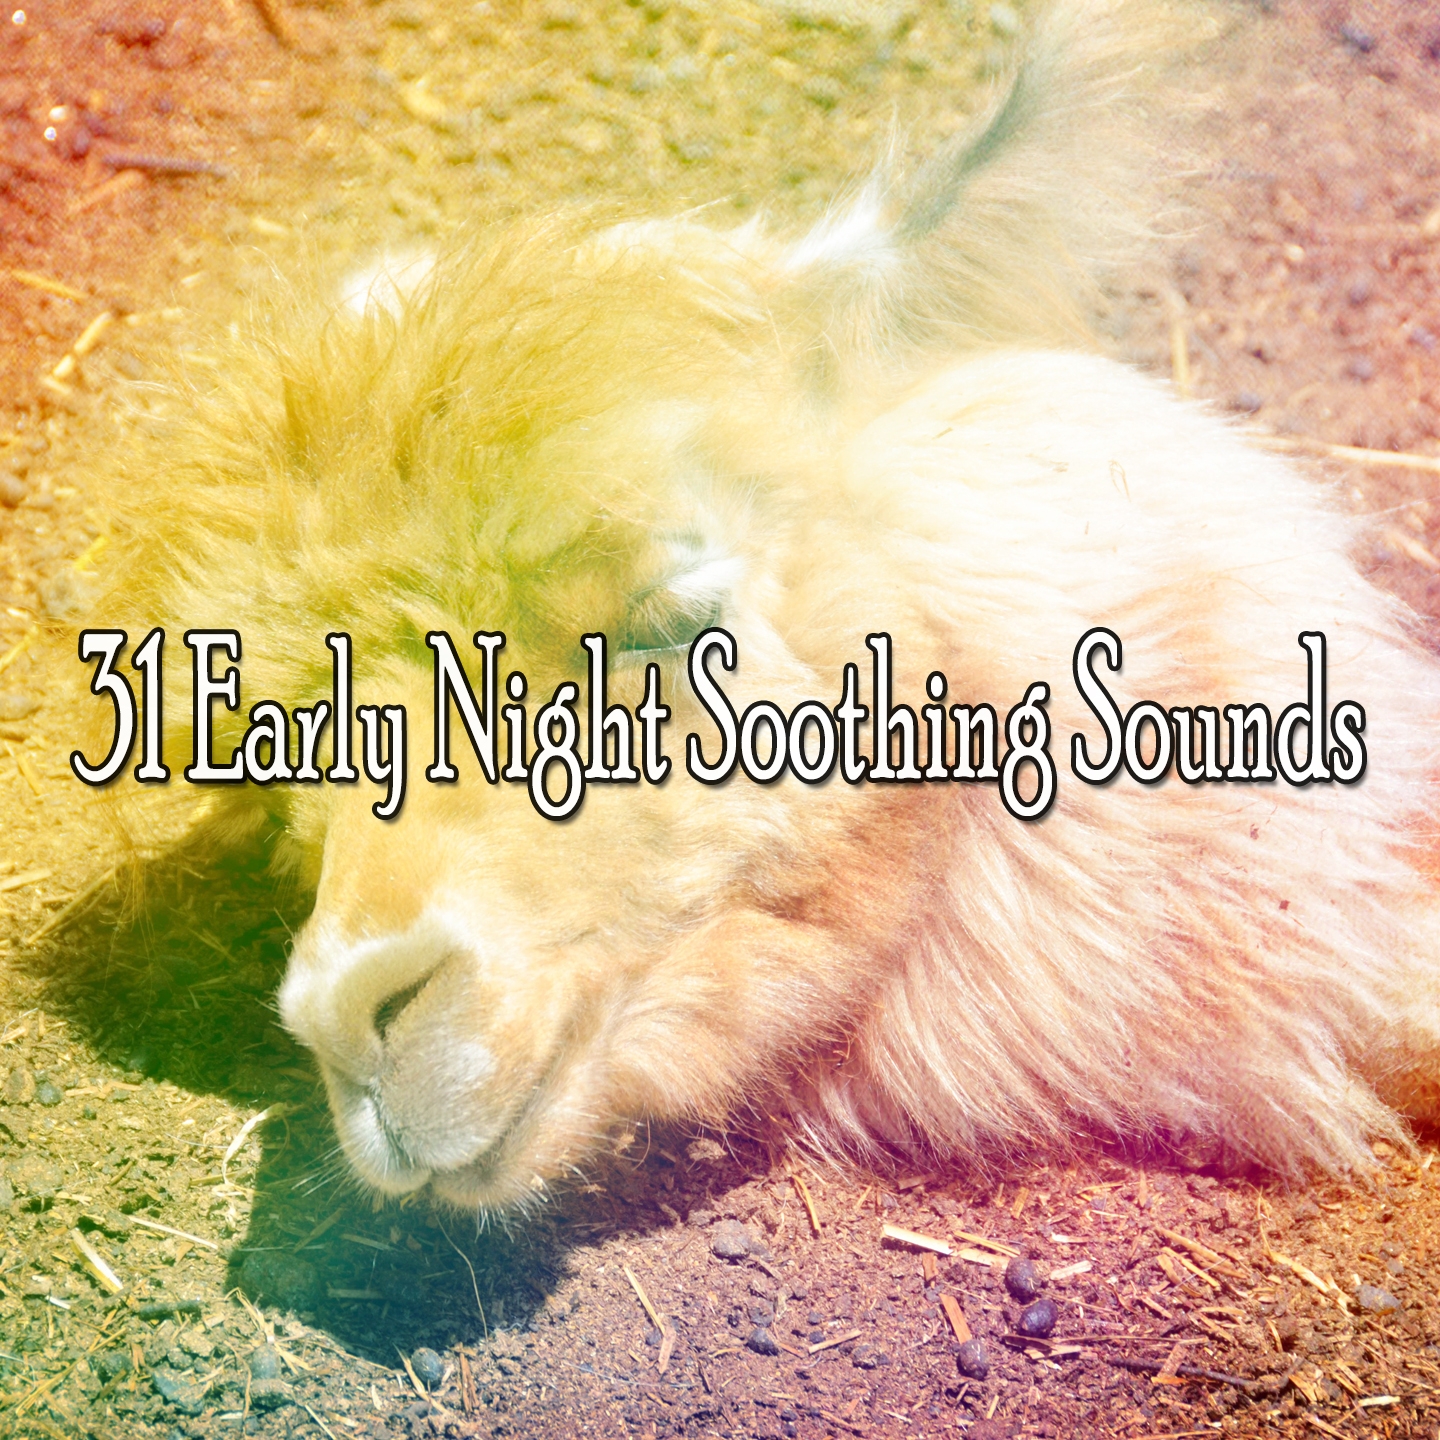 31 Early Night Soothing Sounds